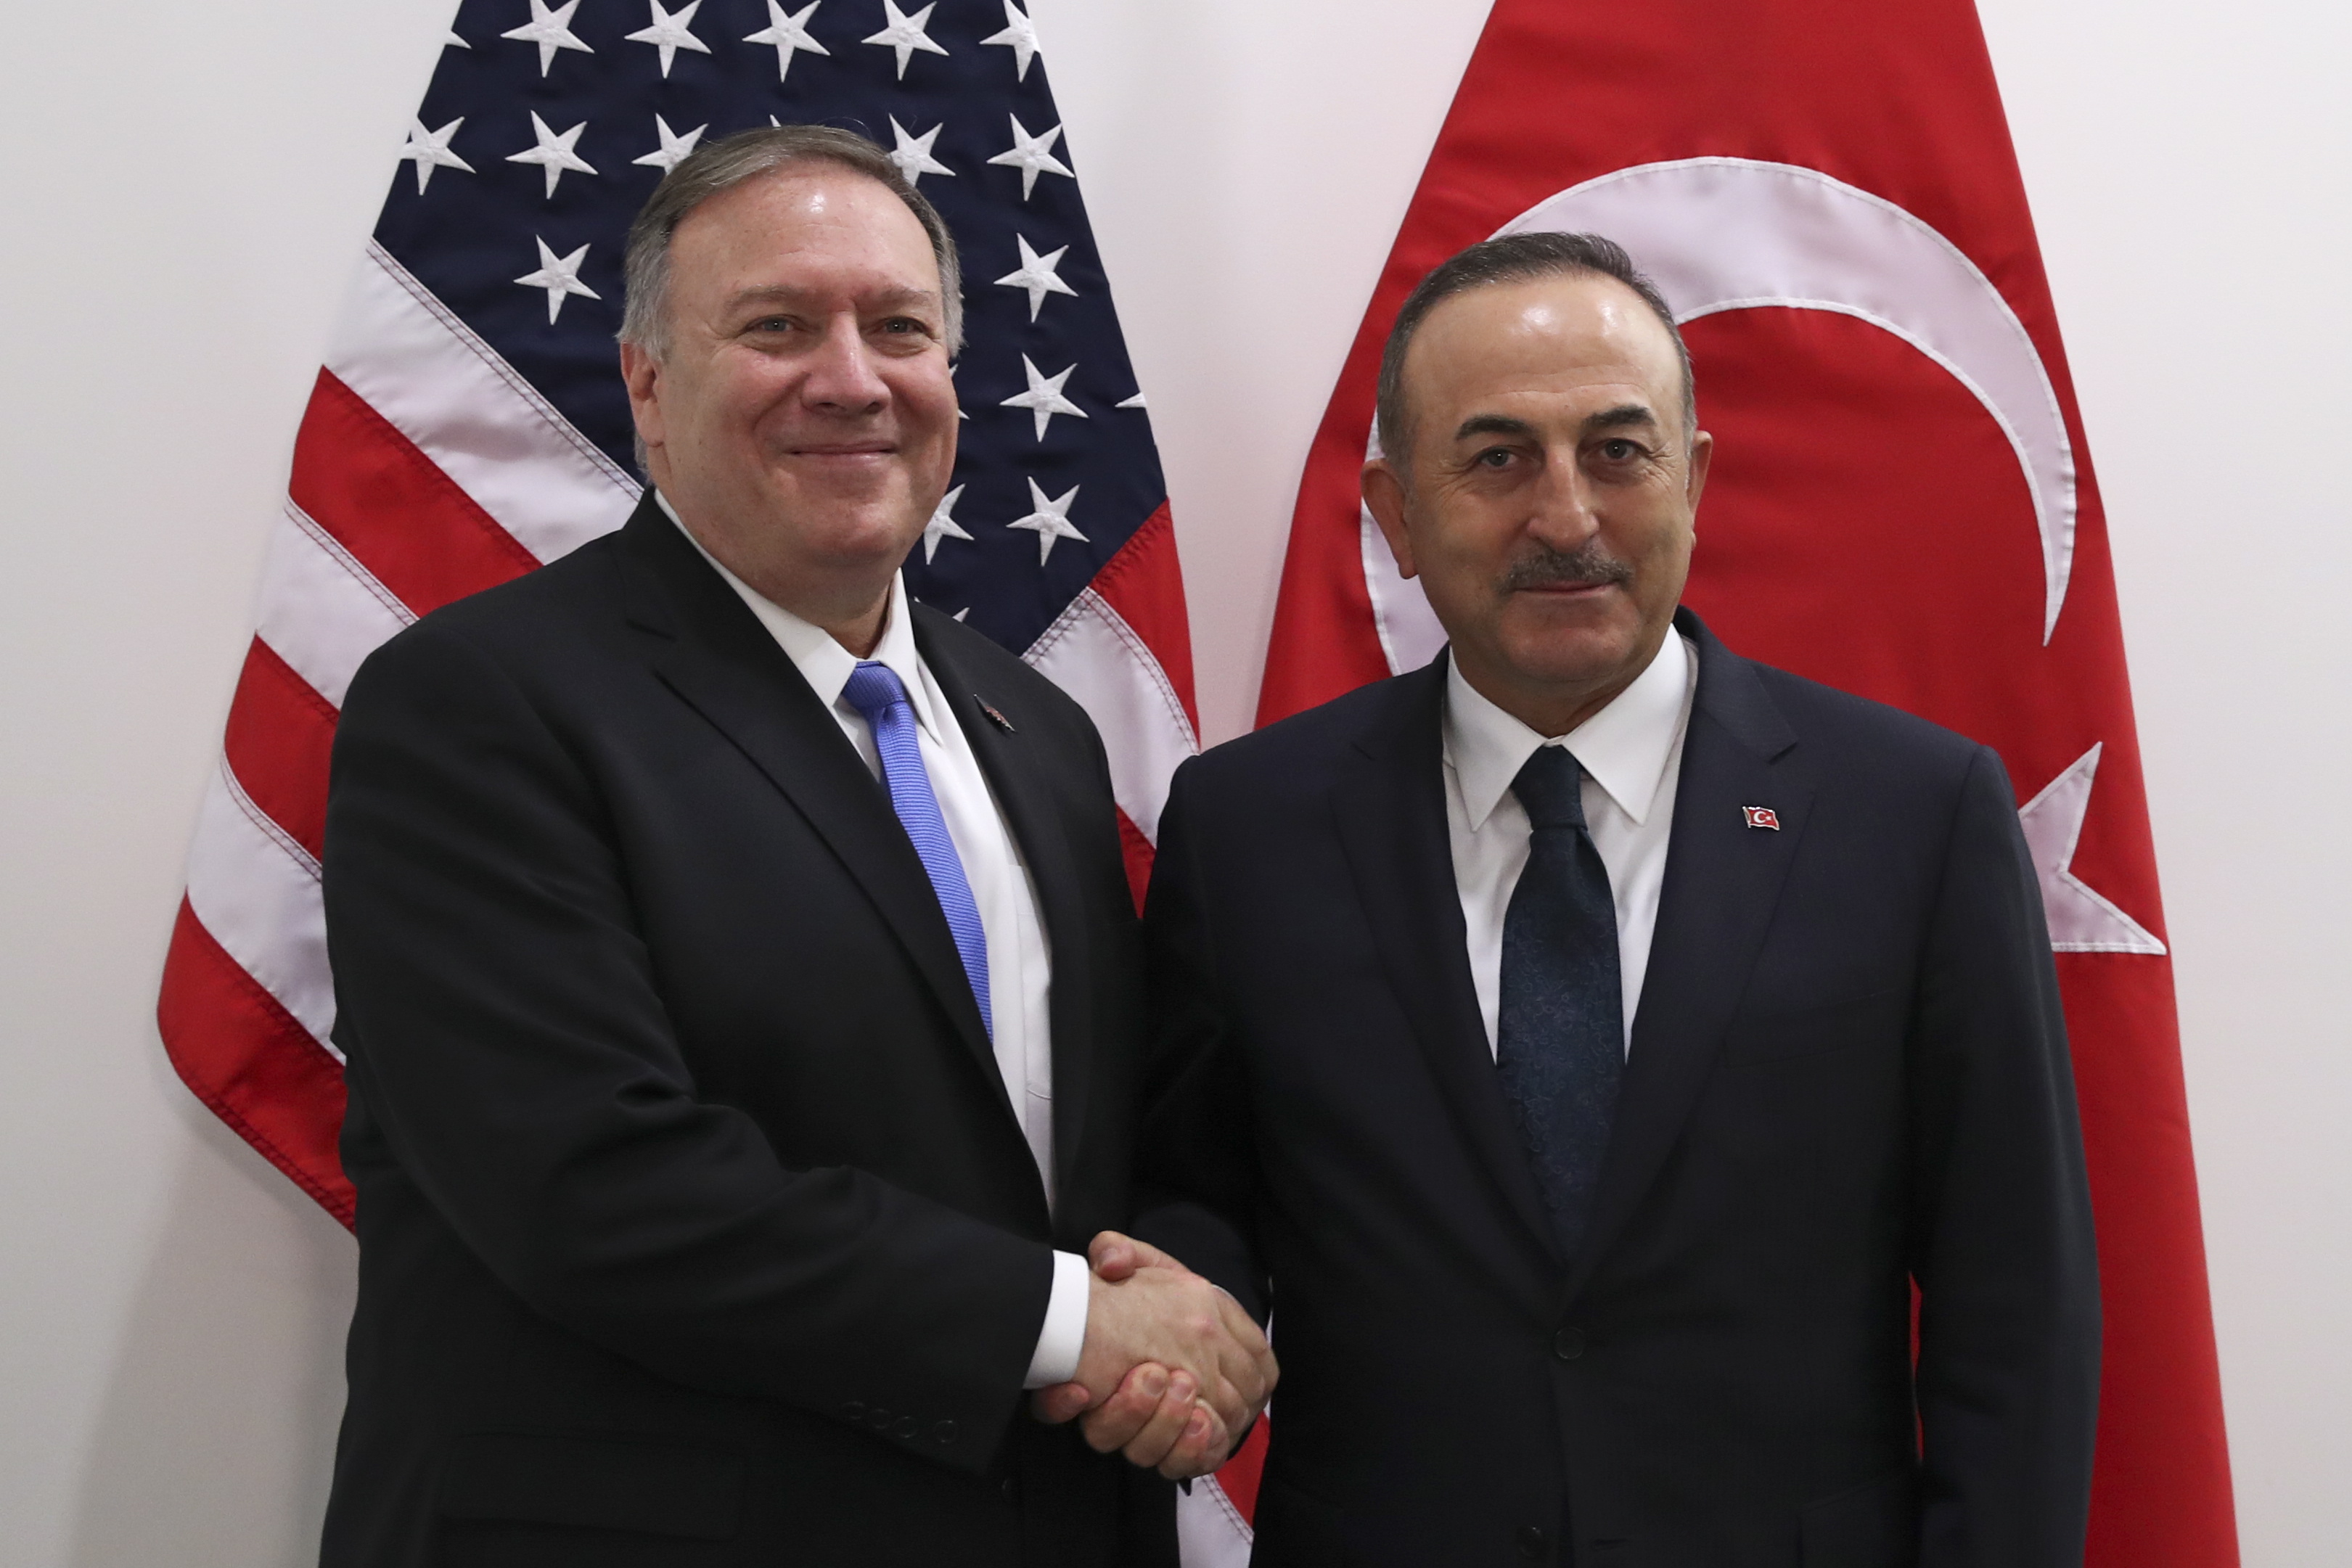 epa08011457 U.S. Secretary of State Mike Pompeo (L) shakes hands with Turkey's Foreign Minister Mevlut Cavusoglu during a NATO Foreign Ministers meeting at the NATO headquarters in Brussels, Belgium 20 November 2019.  EPA/Francisco Seco / POOL